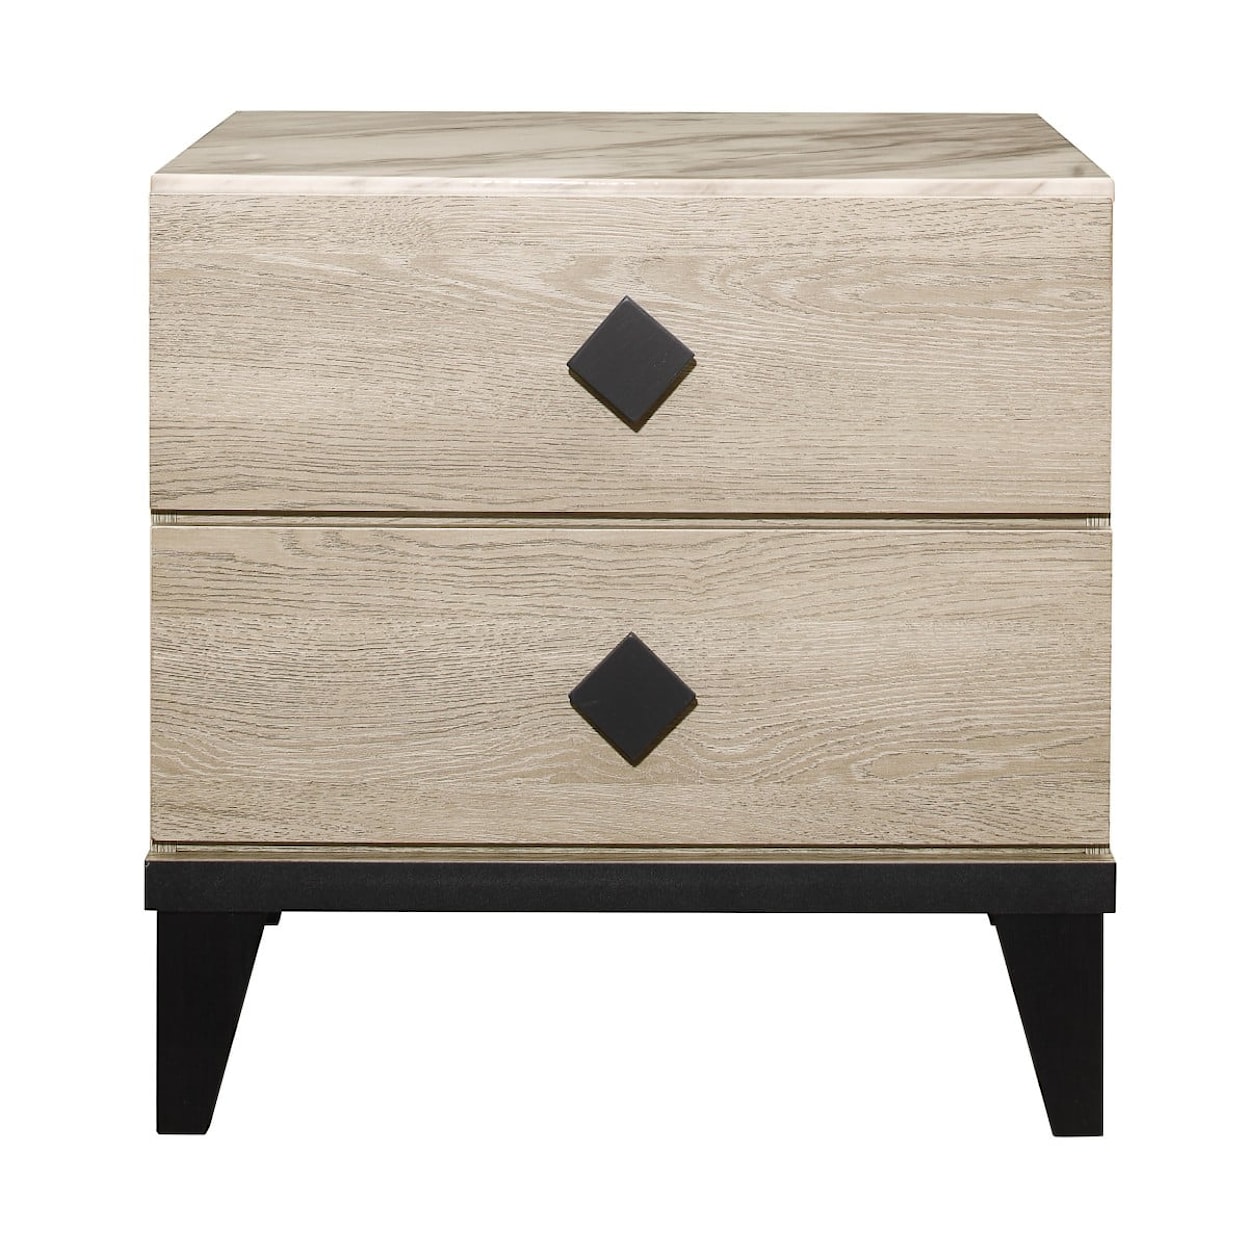 Homelegance Whiting Night Stand